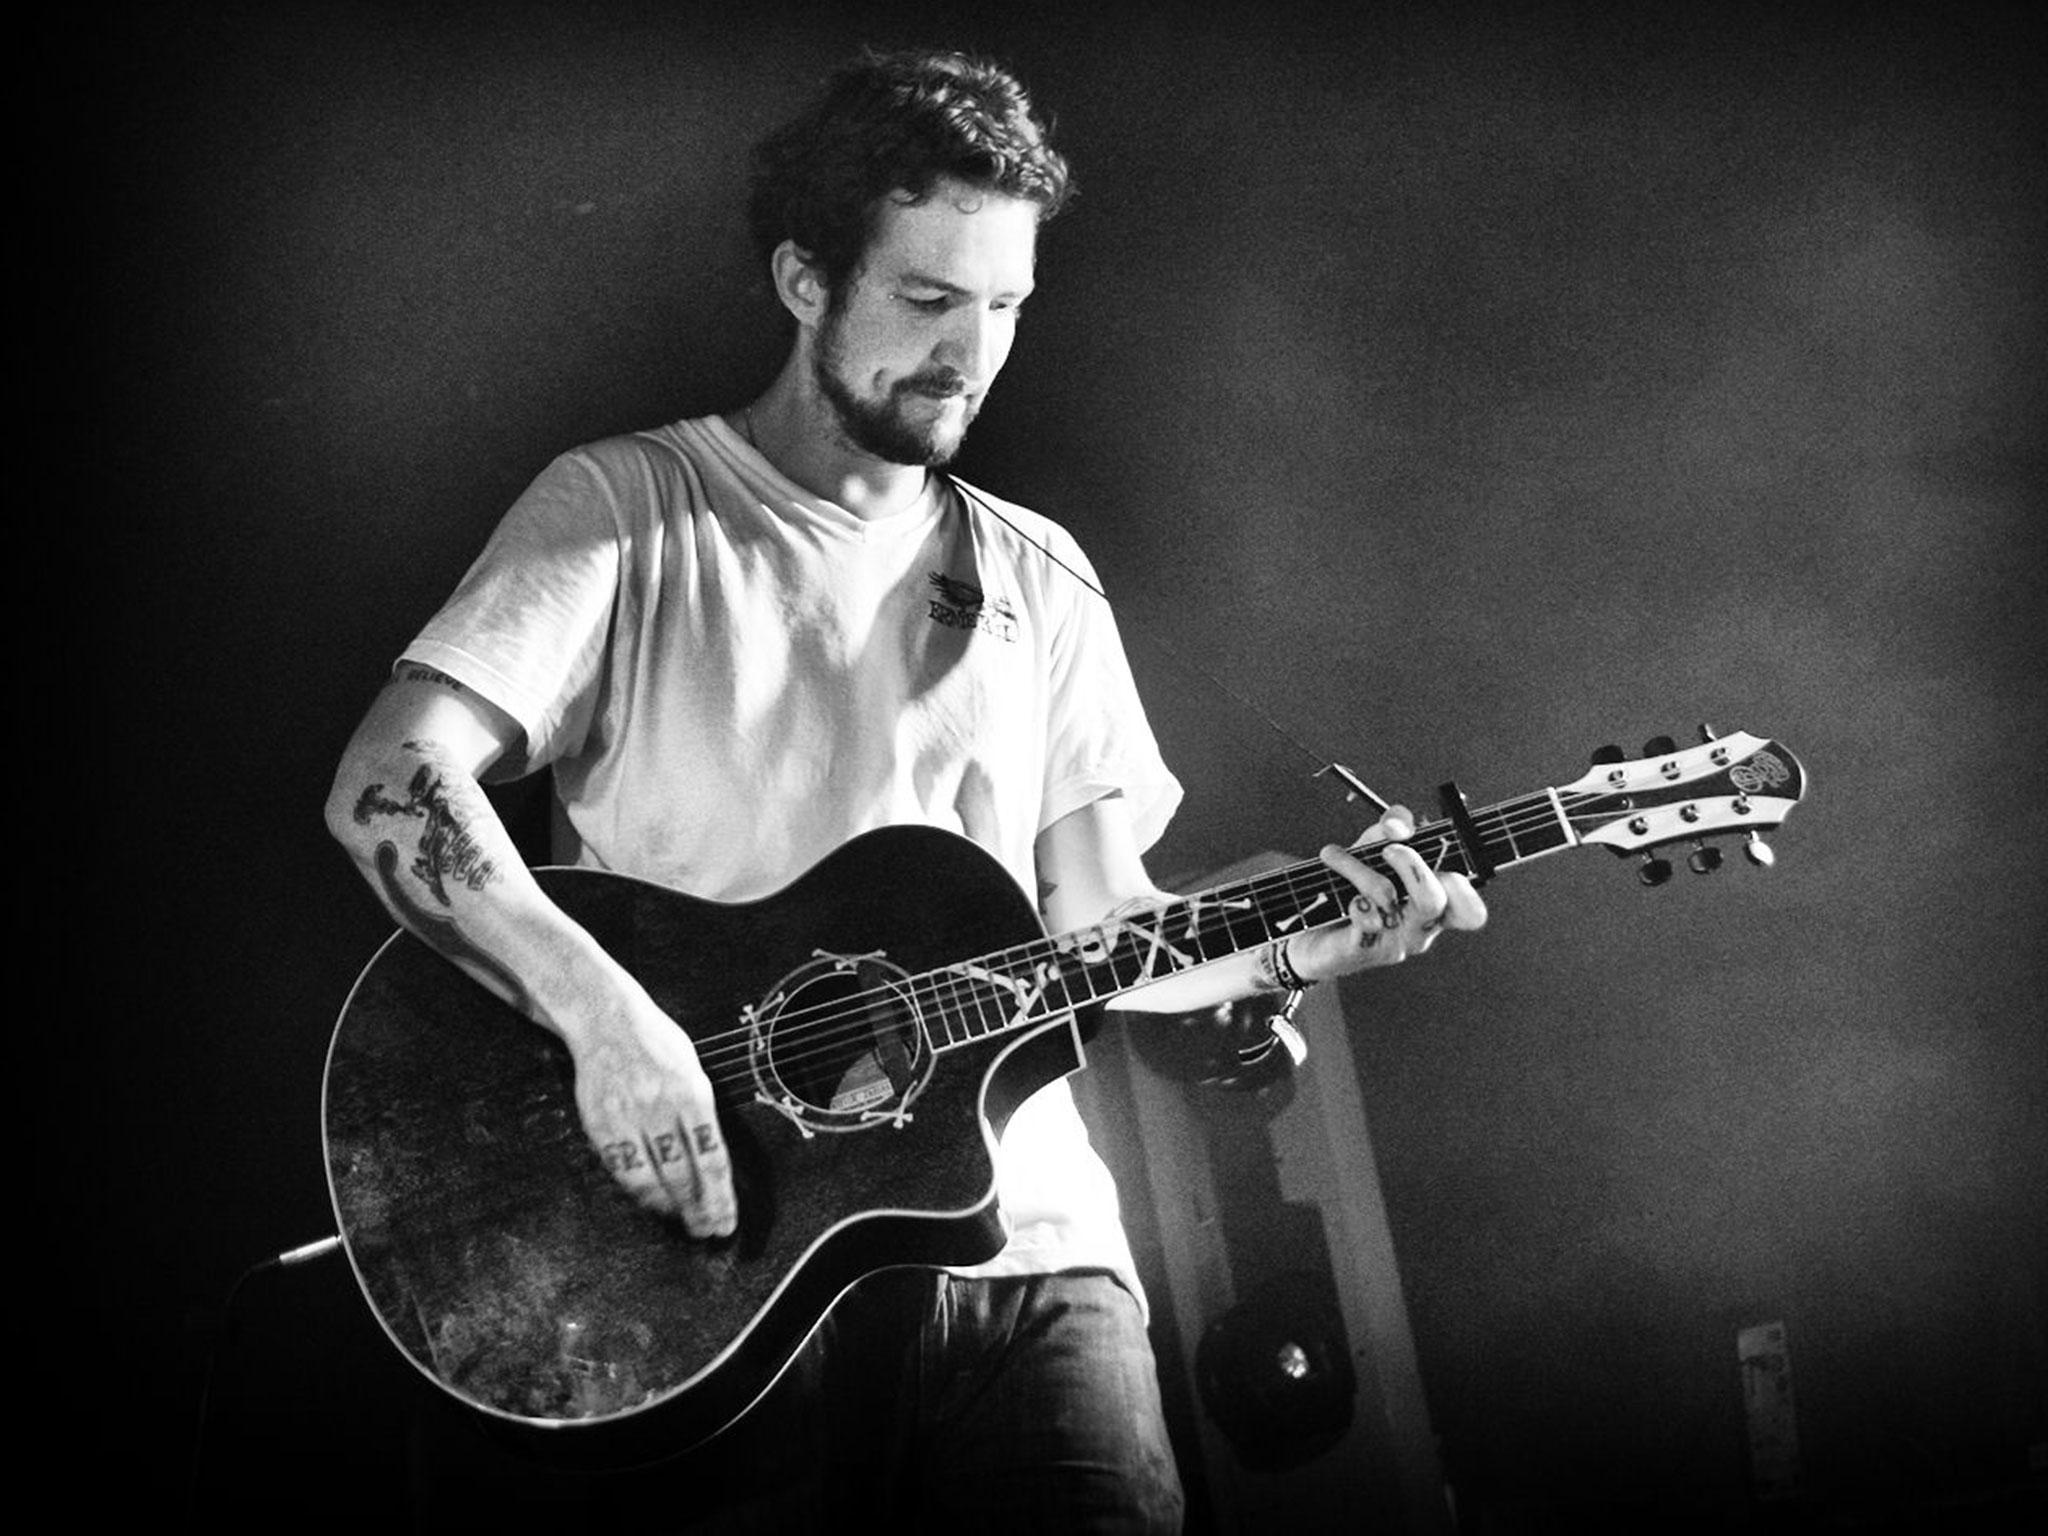 Frank Turner headlining the main stage at 2000trees in 2013